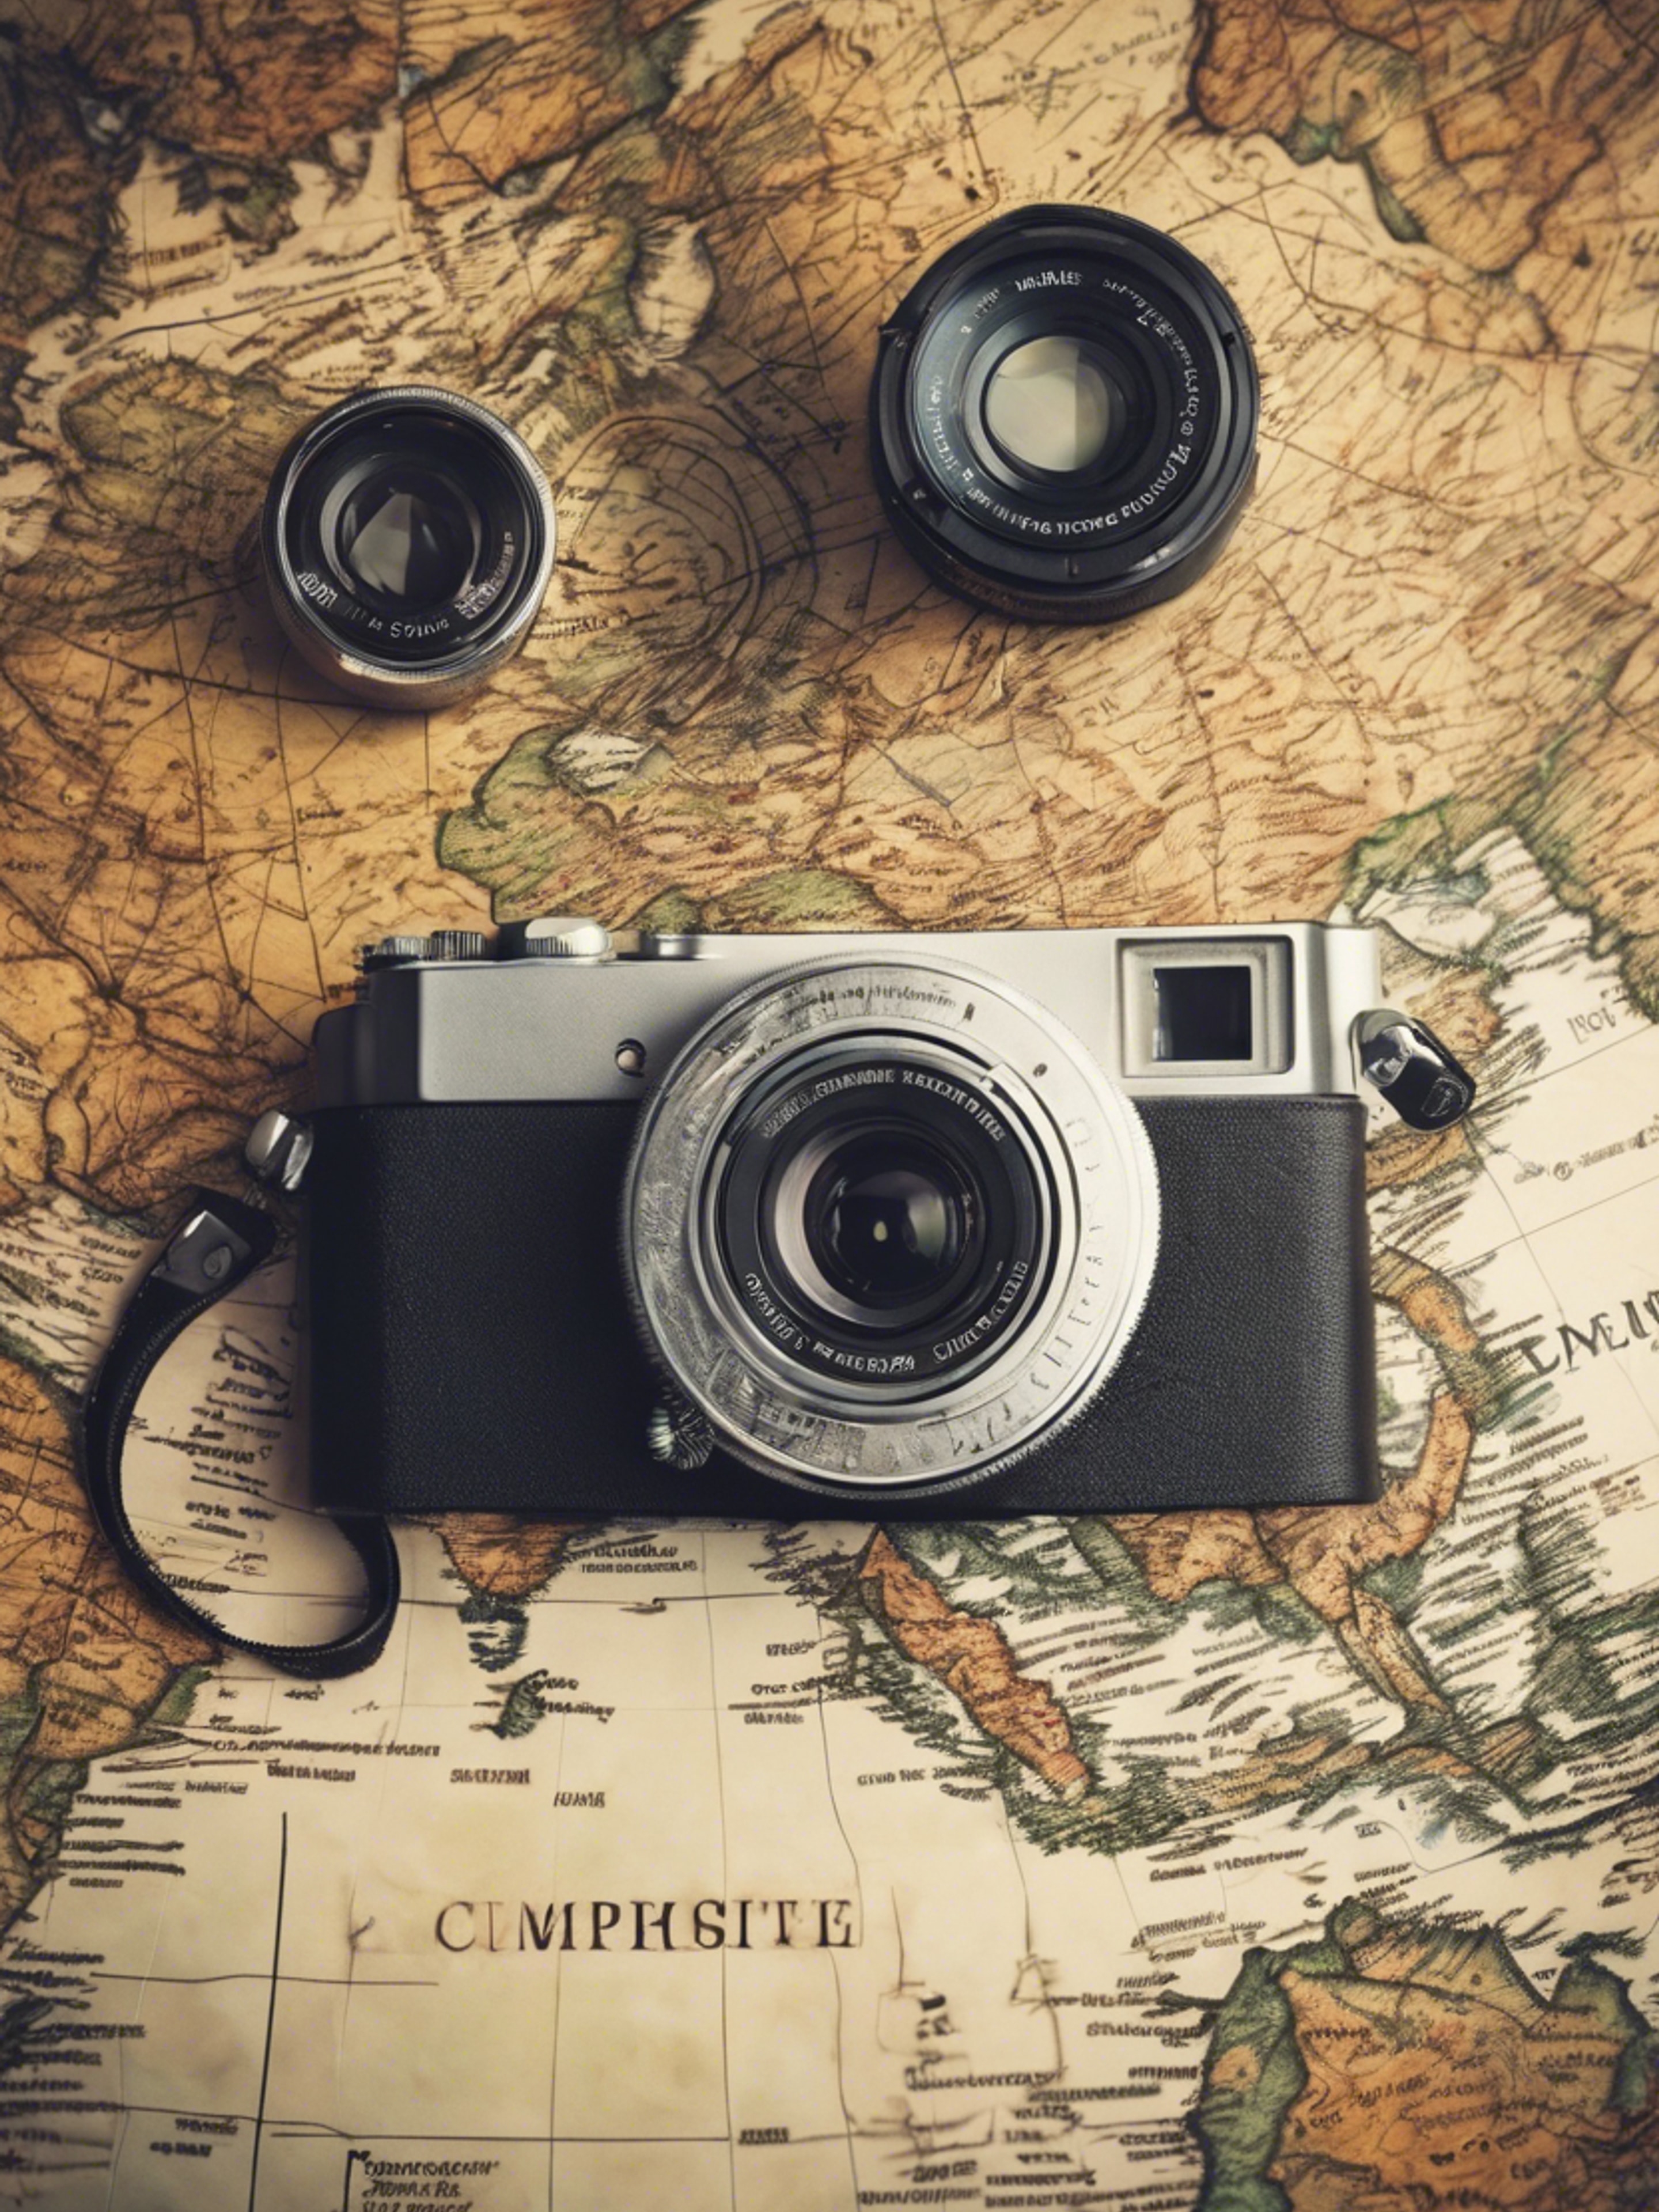 A compact camera with vintage design, placed on a world map to convey the spirit of travel. 벽지[89e32525bdc346769ef4]